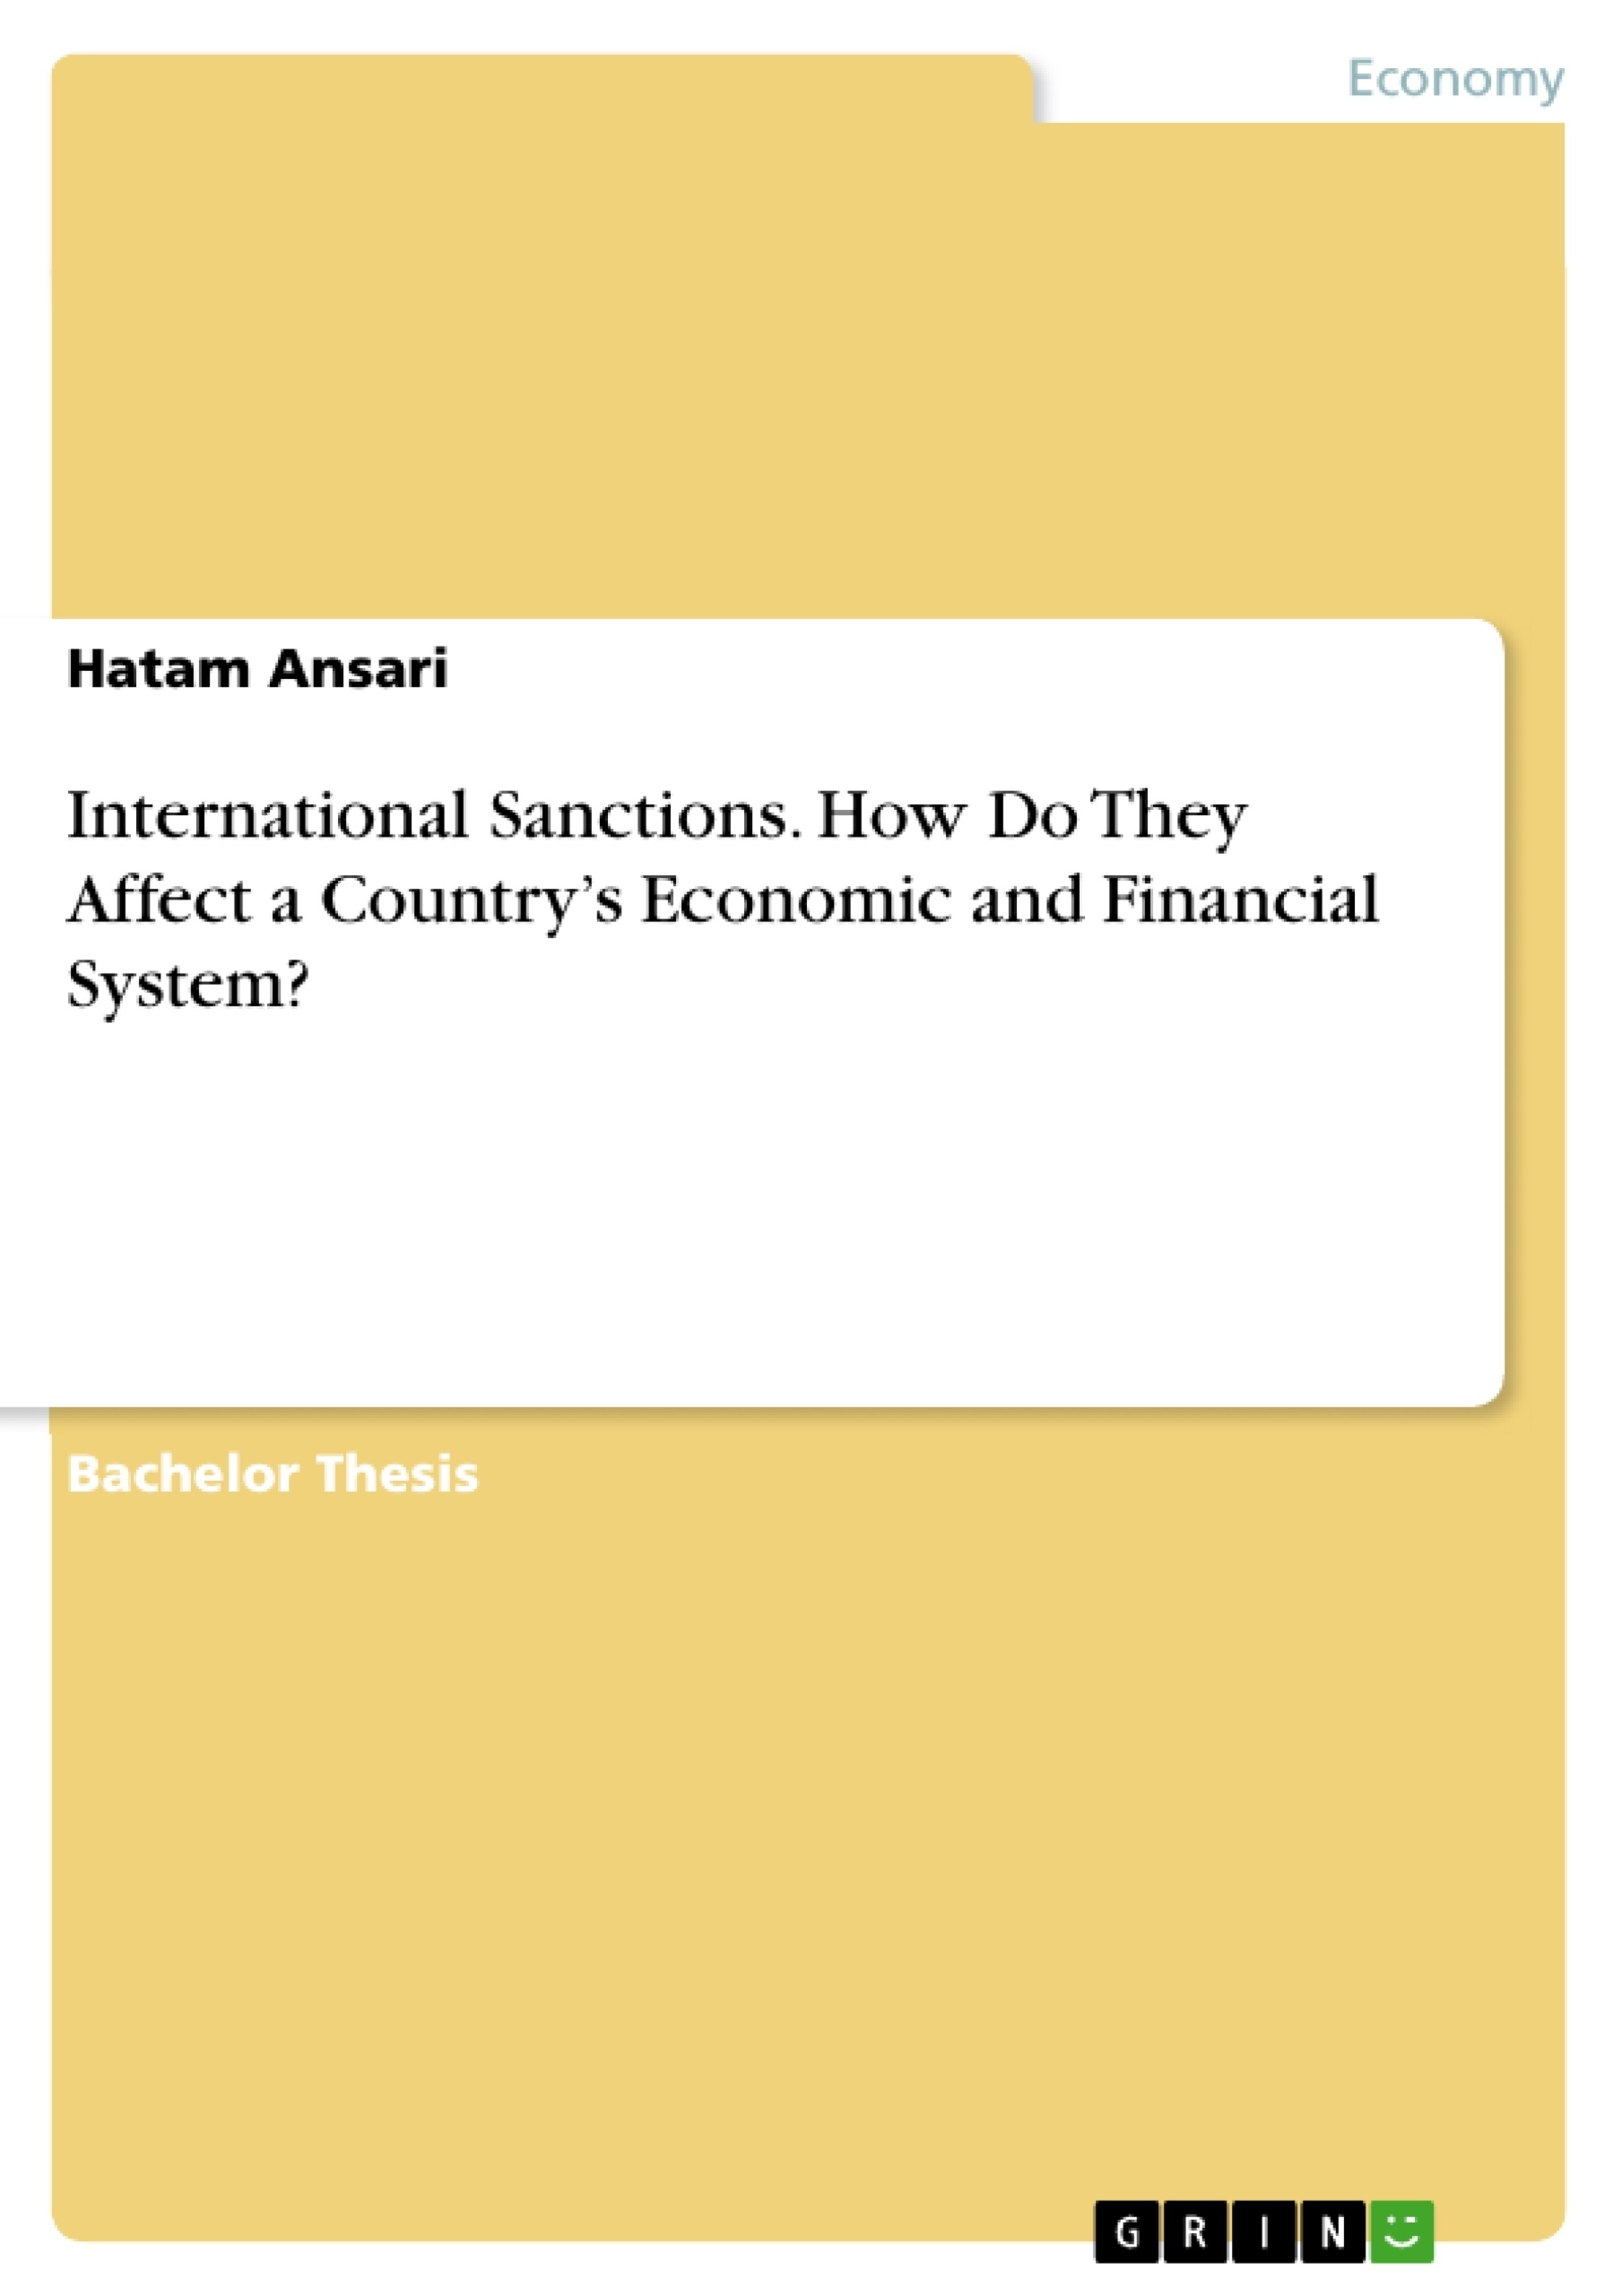 Title: International Sanctions. How Do They Affect a Country’s Economic and Financial System?